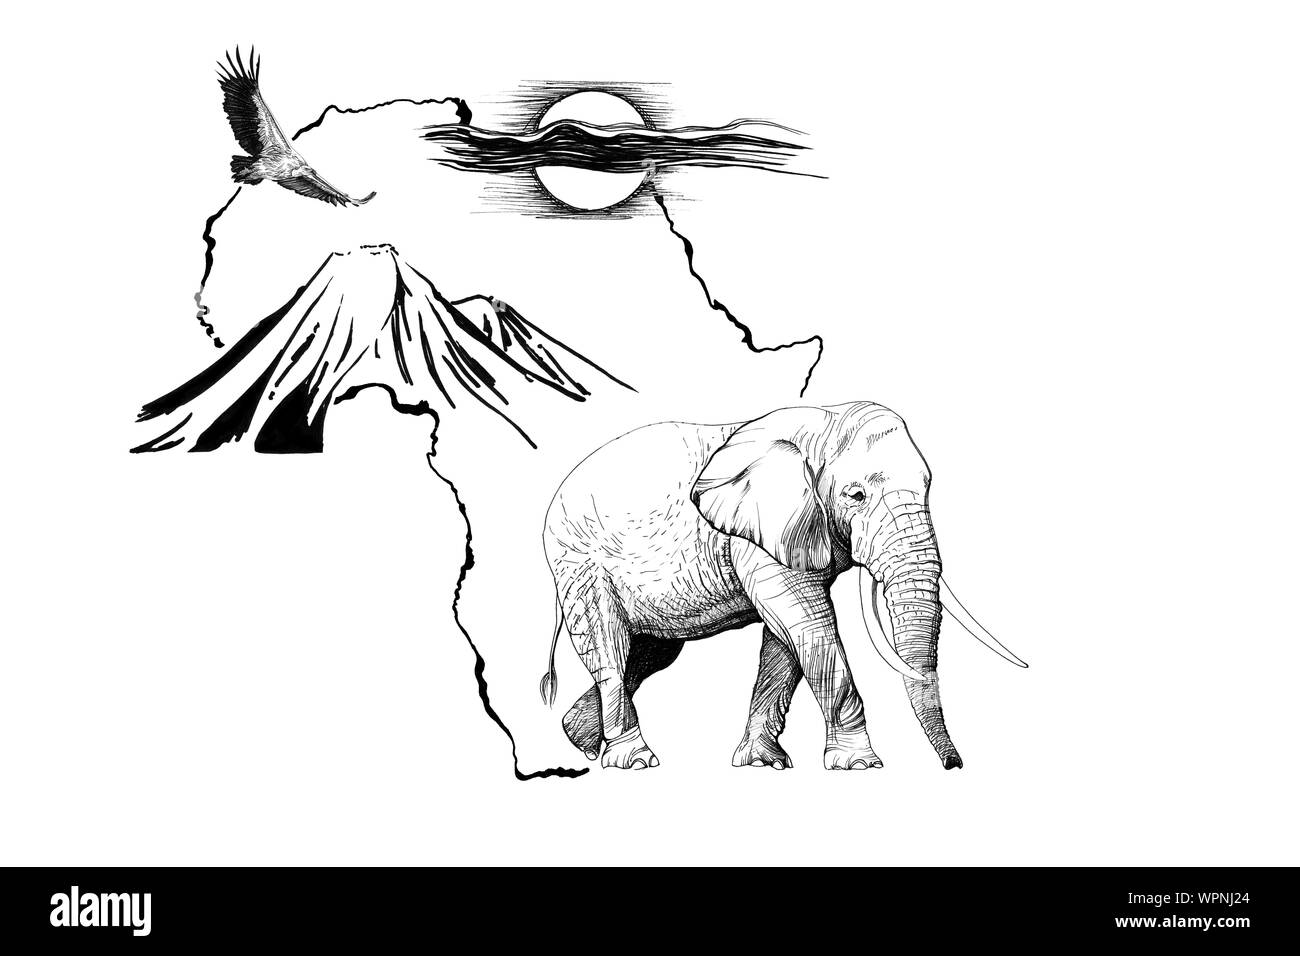 Elephant on Africa map background with Kilimanjaro mountain, vulture and sun. Collection of hand drawn illustrations (originals, no tracing) Stock Photo